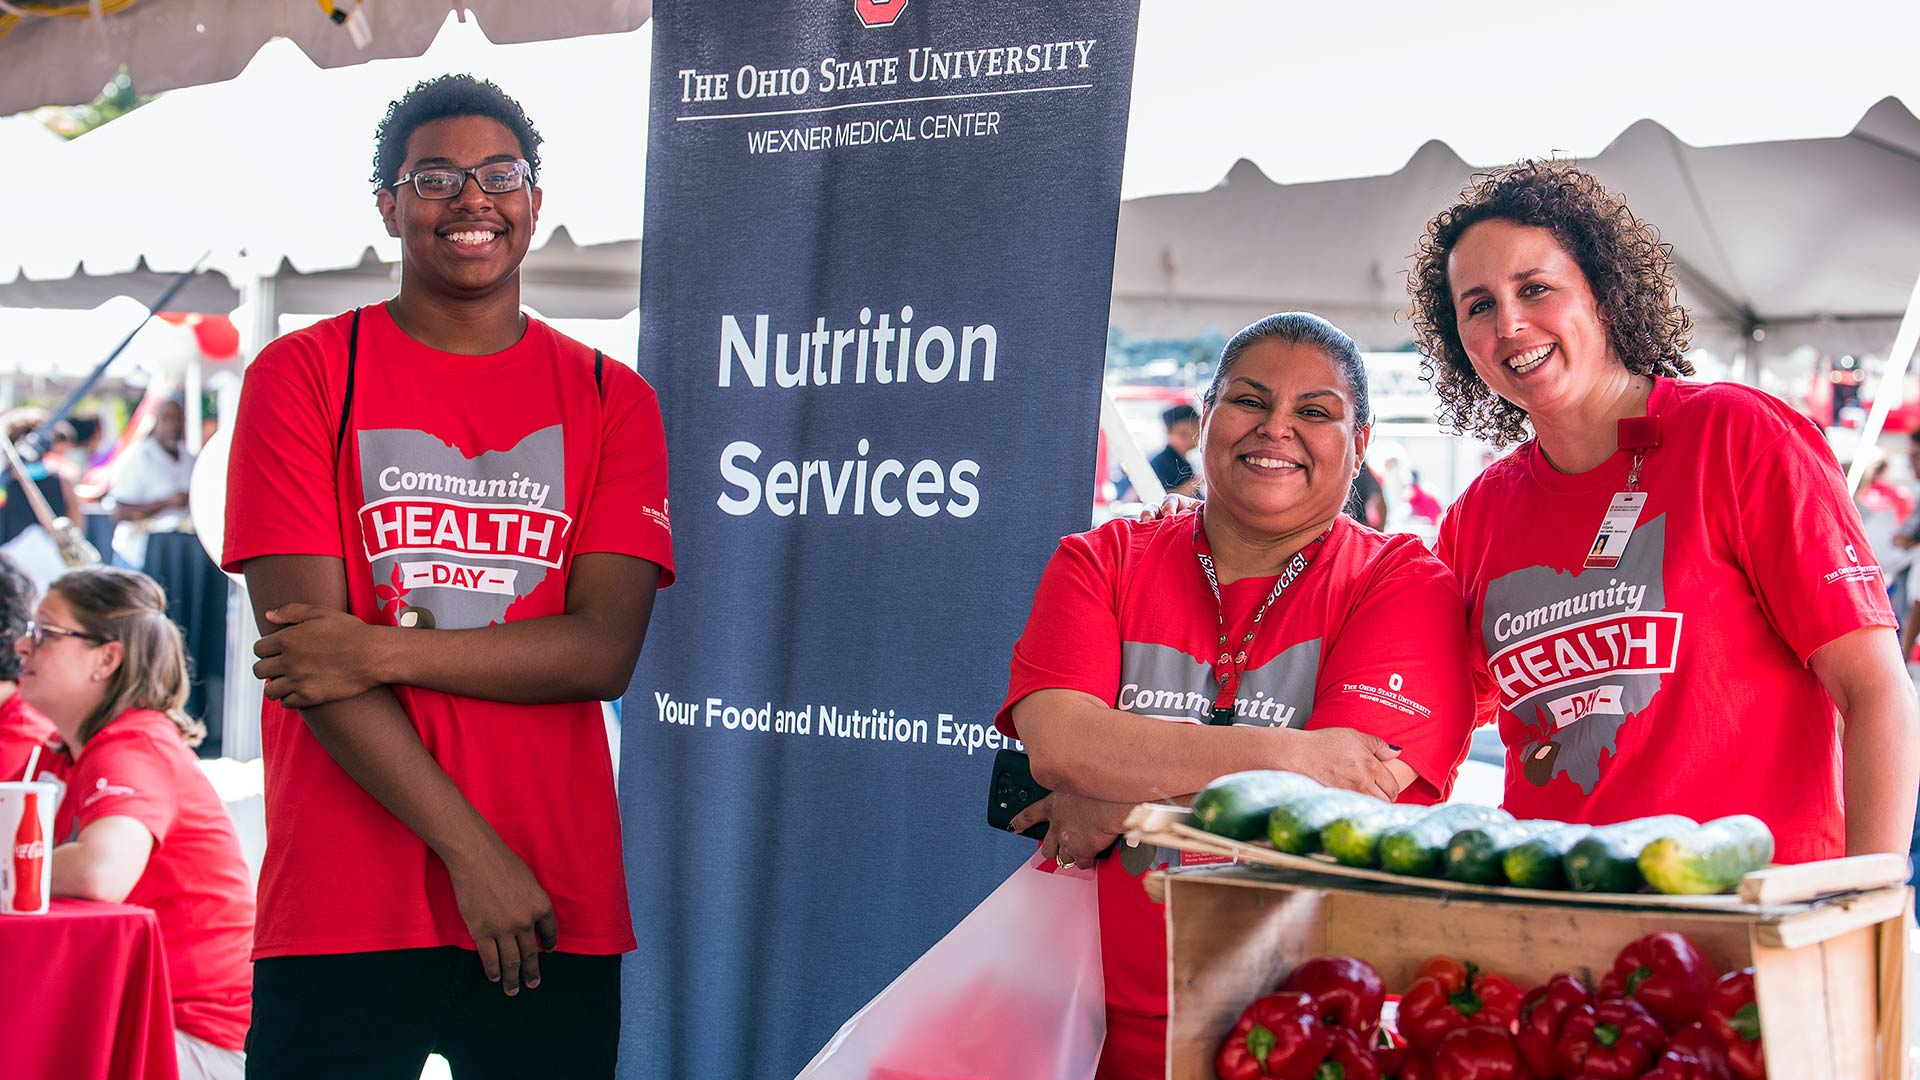 Nutrition services stand